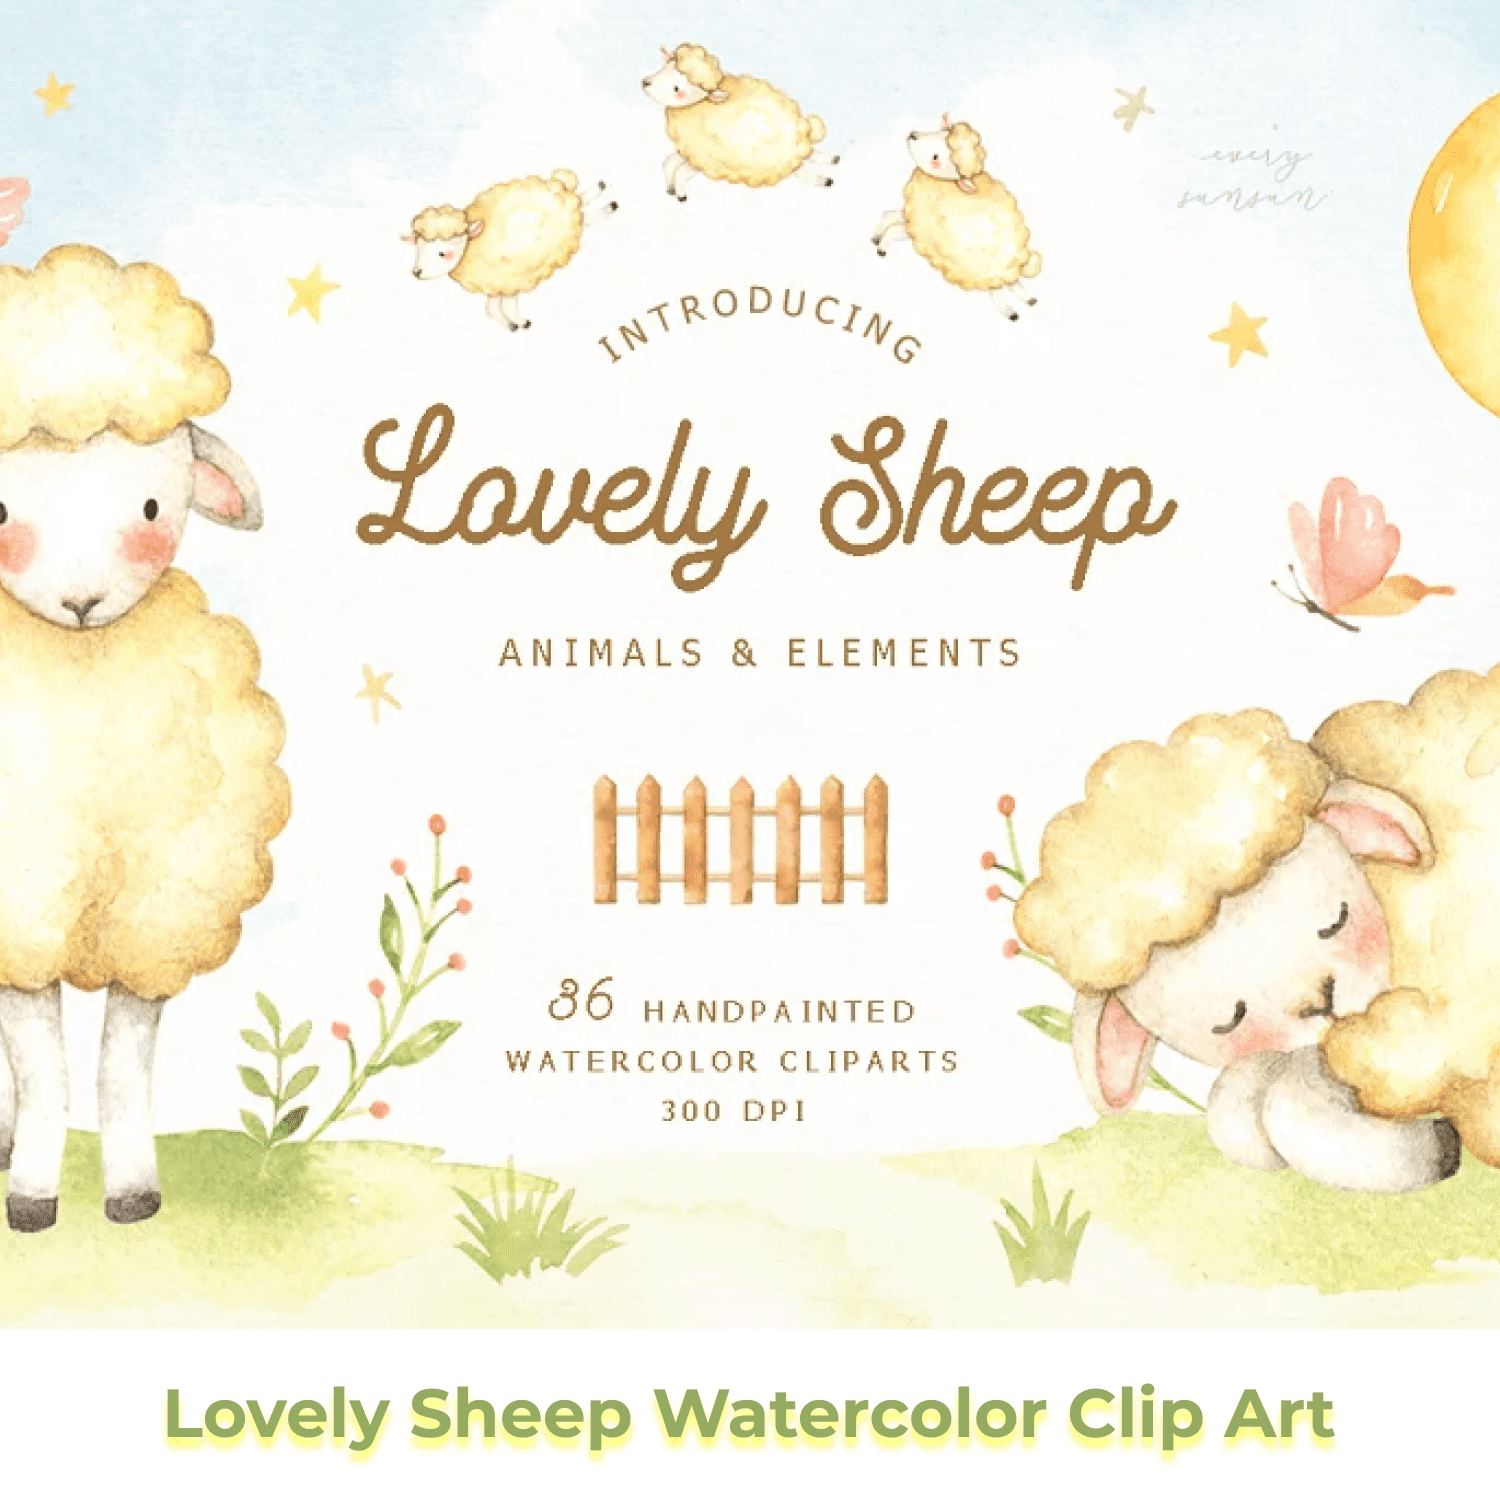 Lovely Sheep Watercolor Clip Art cover.